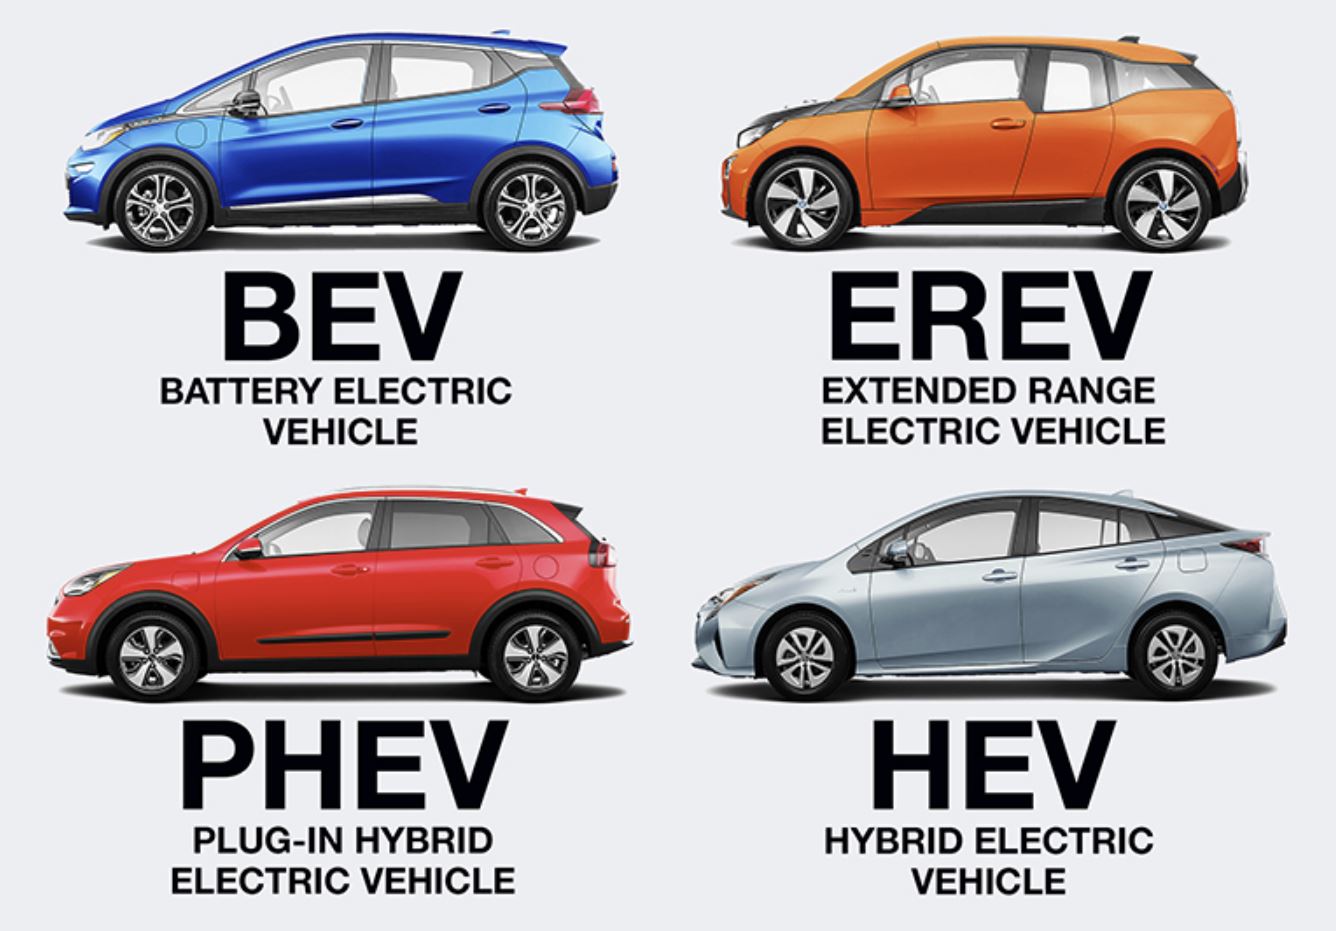 Extended range electric vehicle list